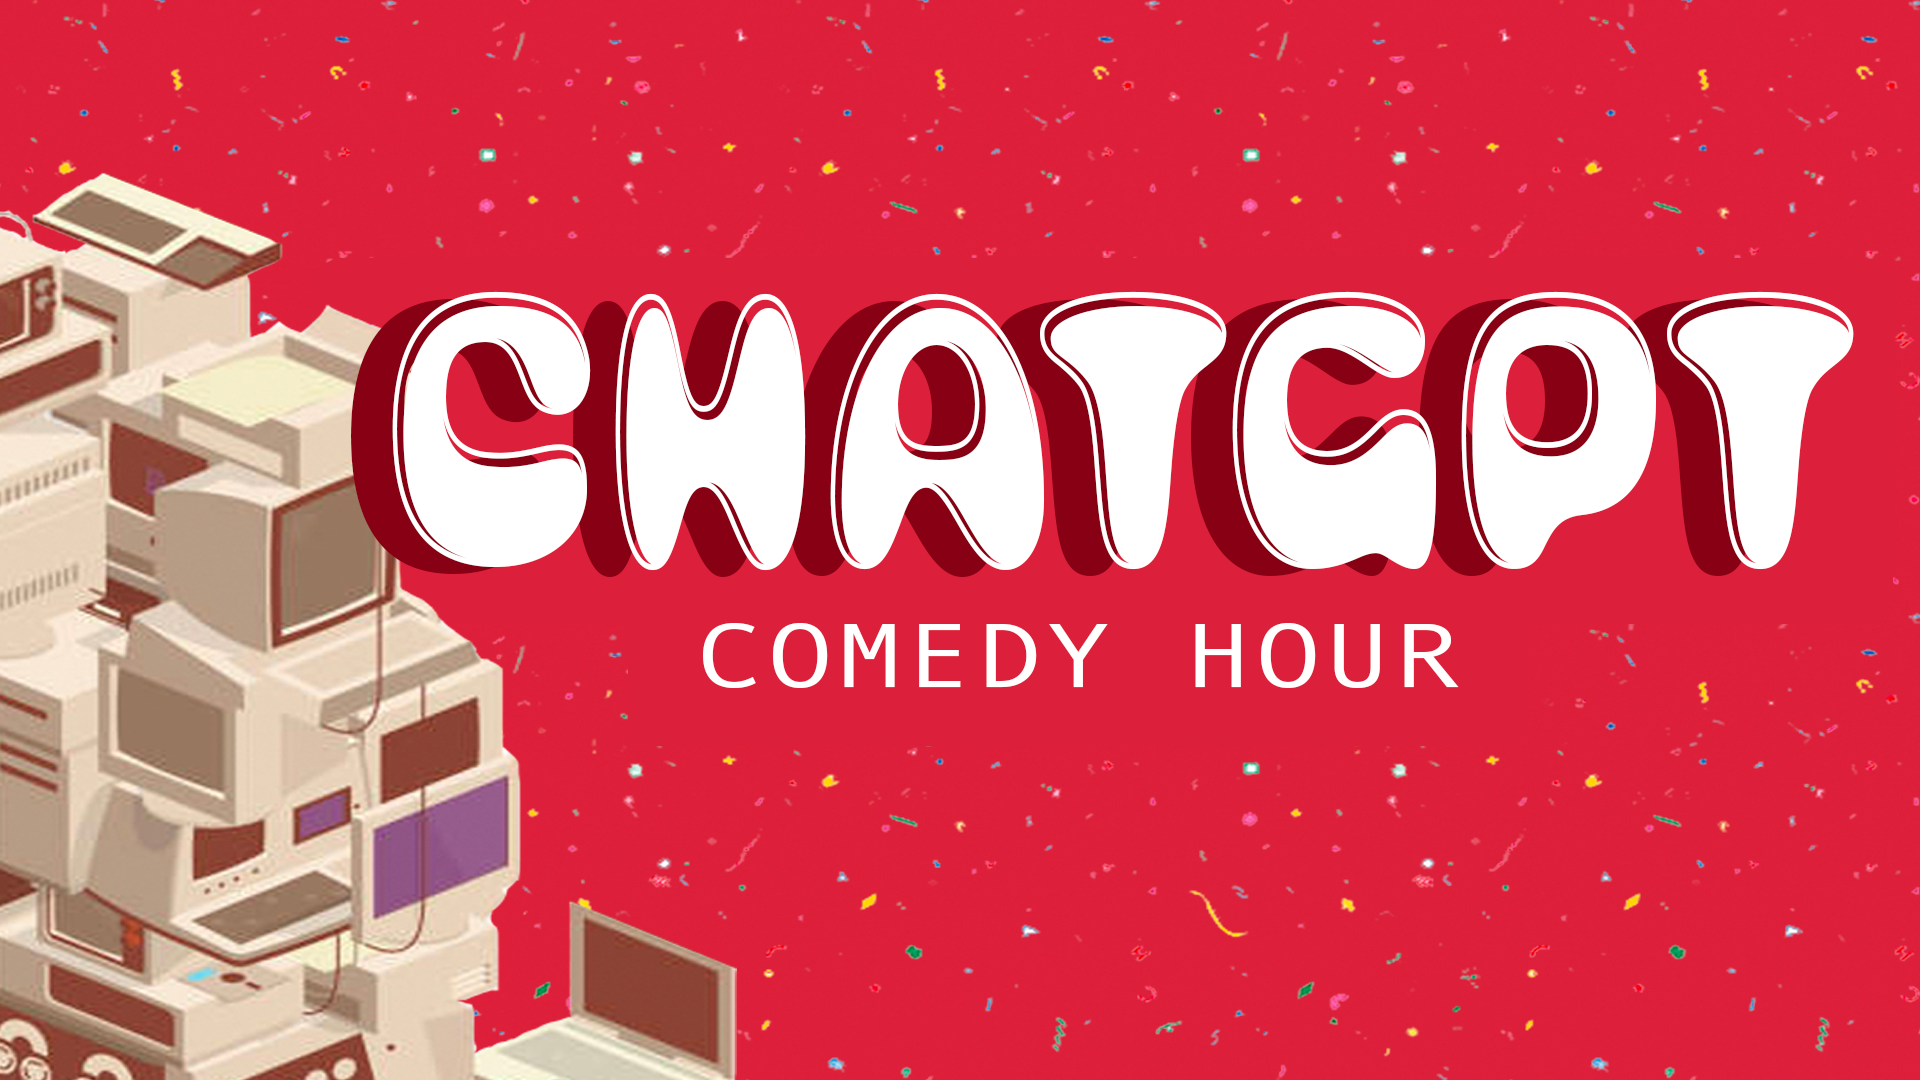 ChatGPT Comedy Hour